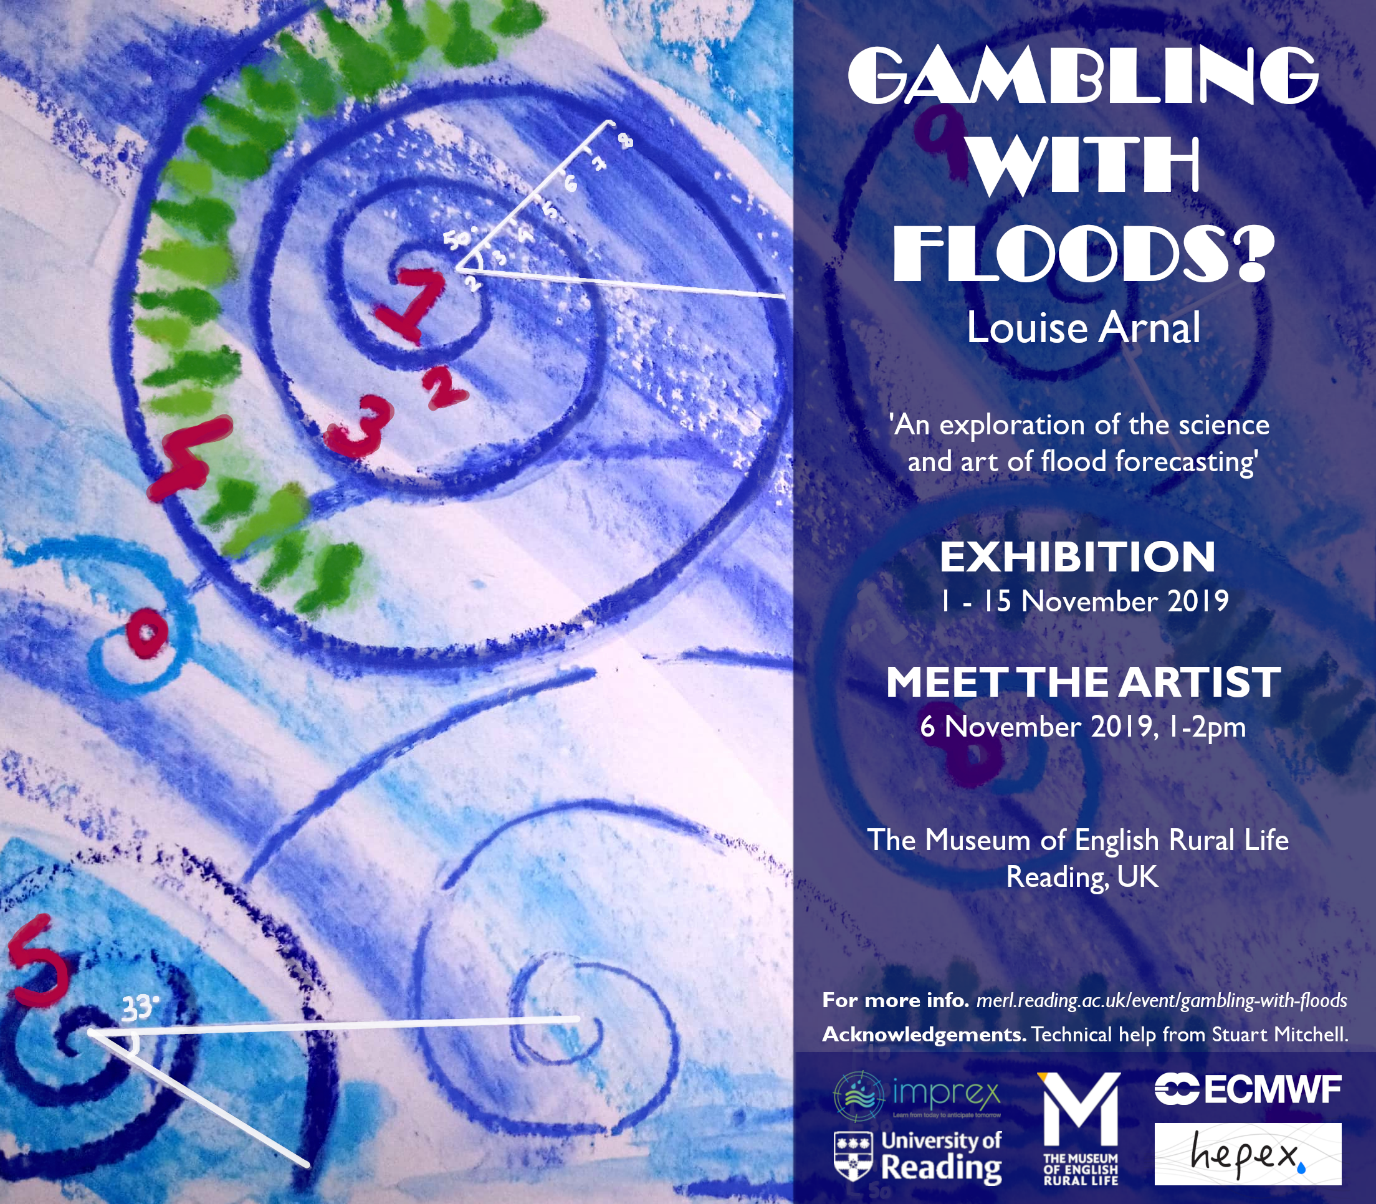 "Gambling with Floods?" exhibition flyer